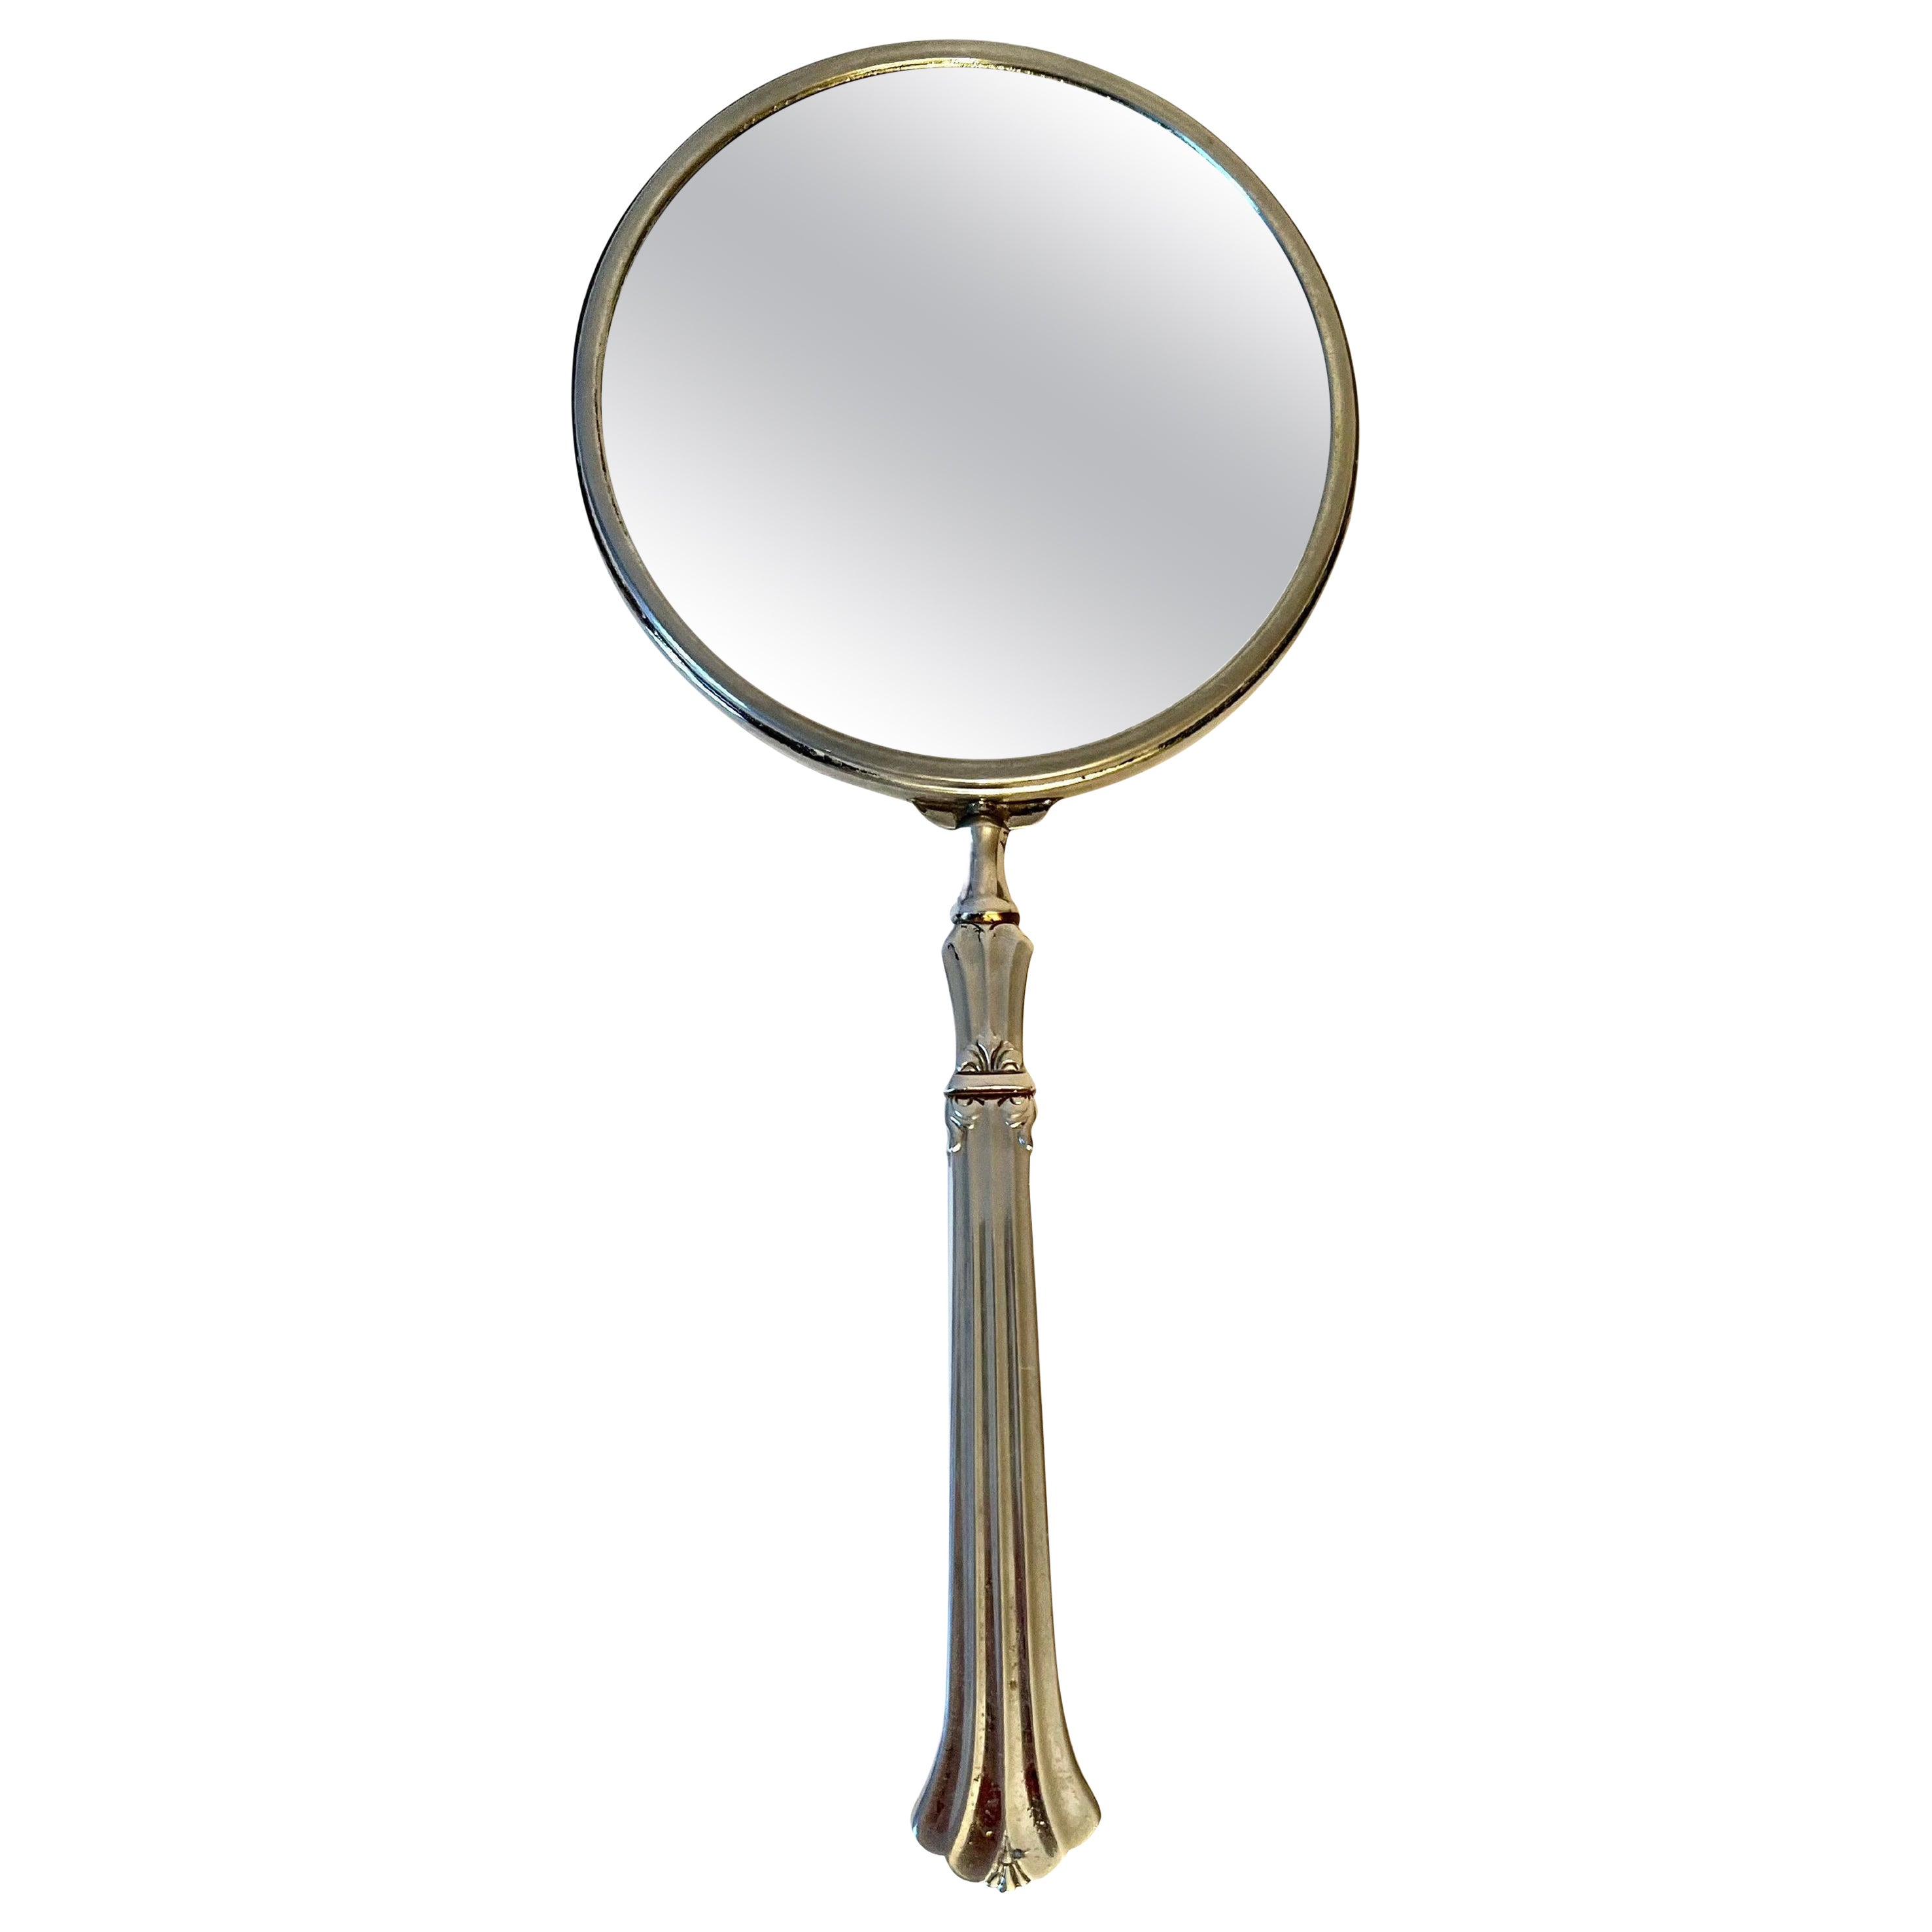 Silver Hand Mirror with Magnification on Opposing side